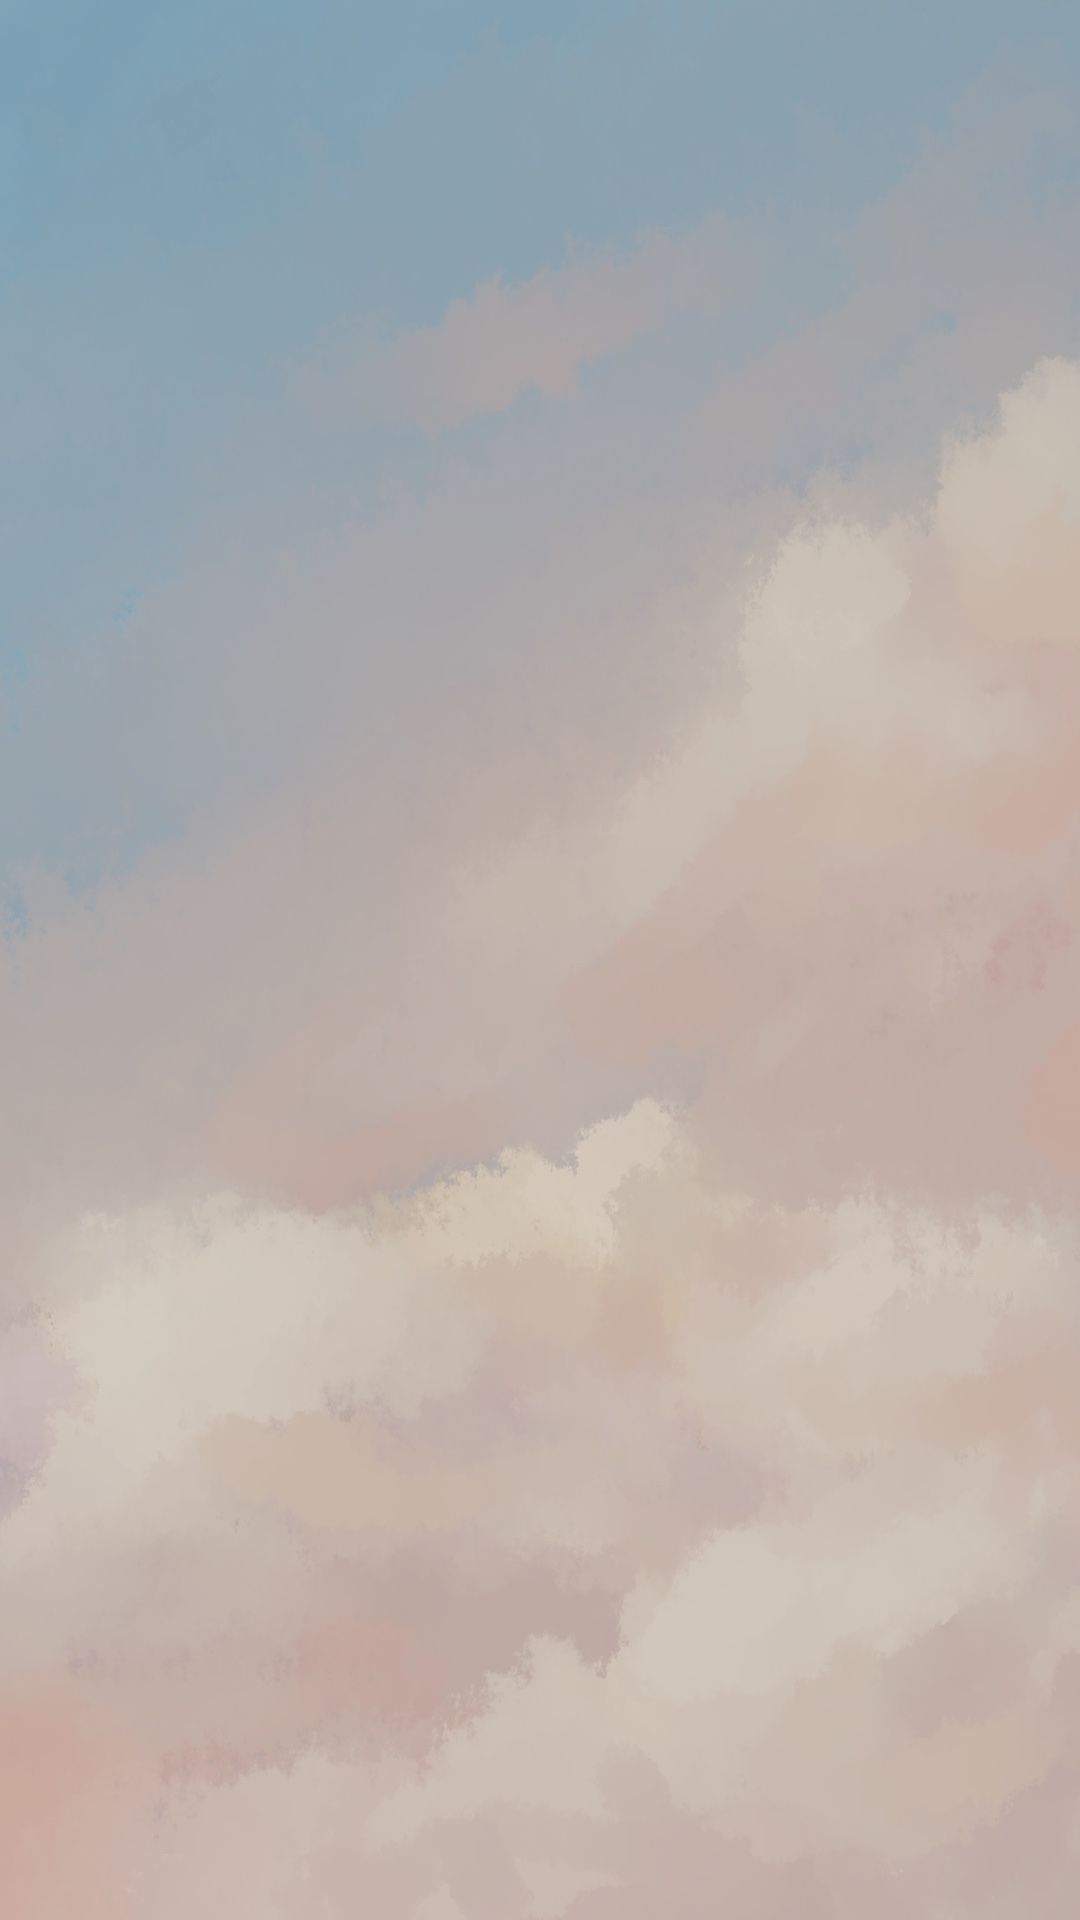 IPhone wallpaper of a cloudy sky in pastel colors - Calming